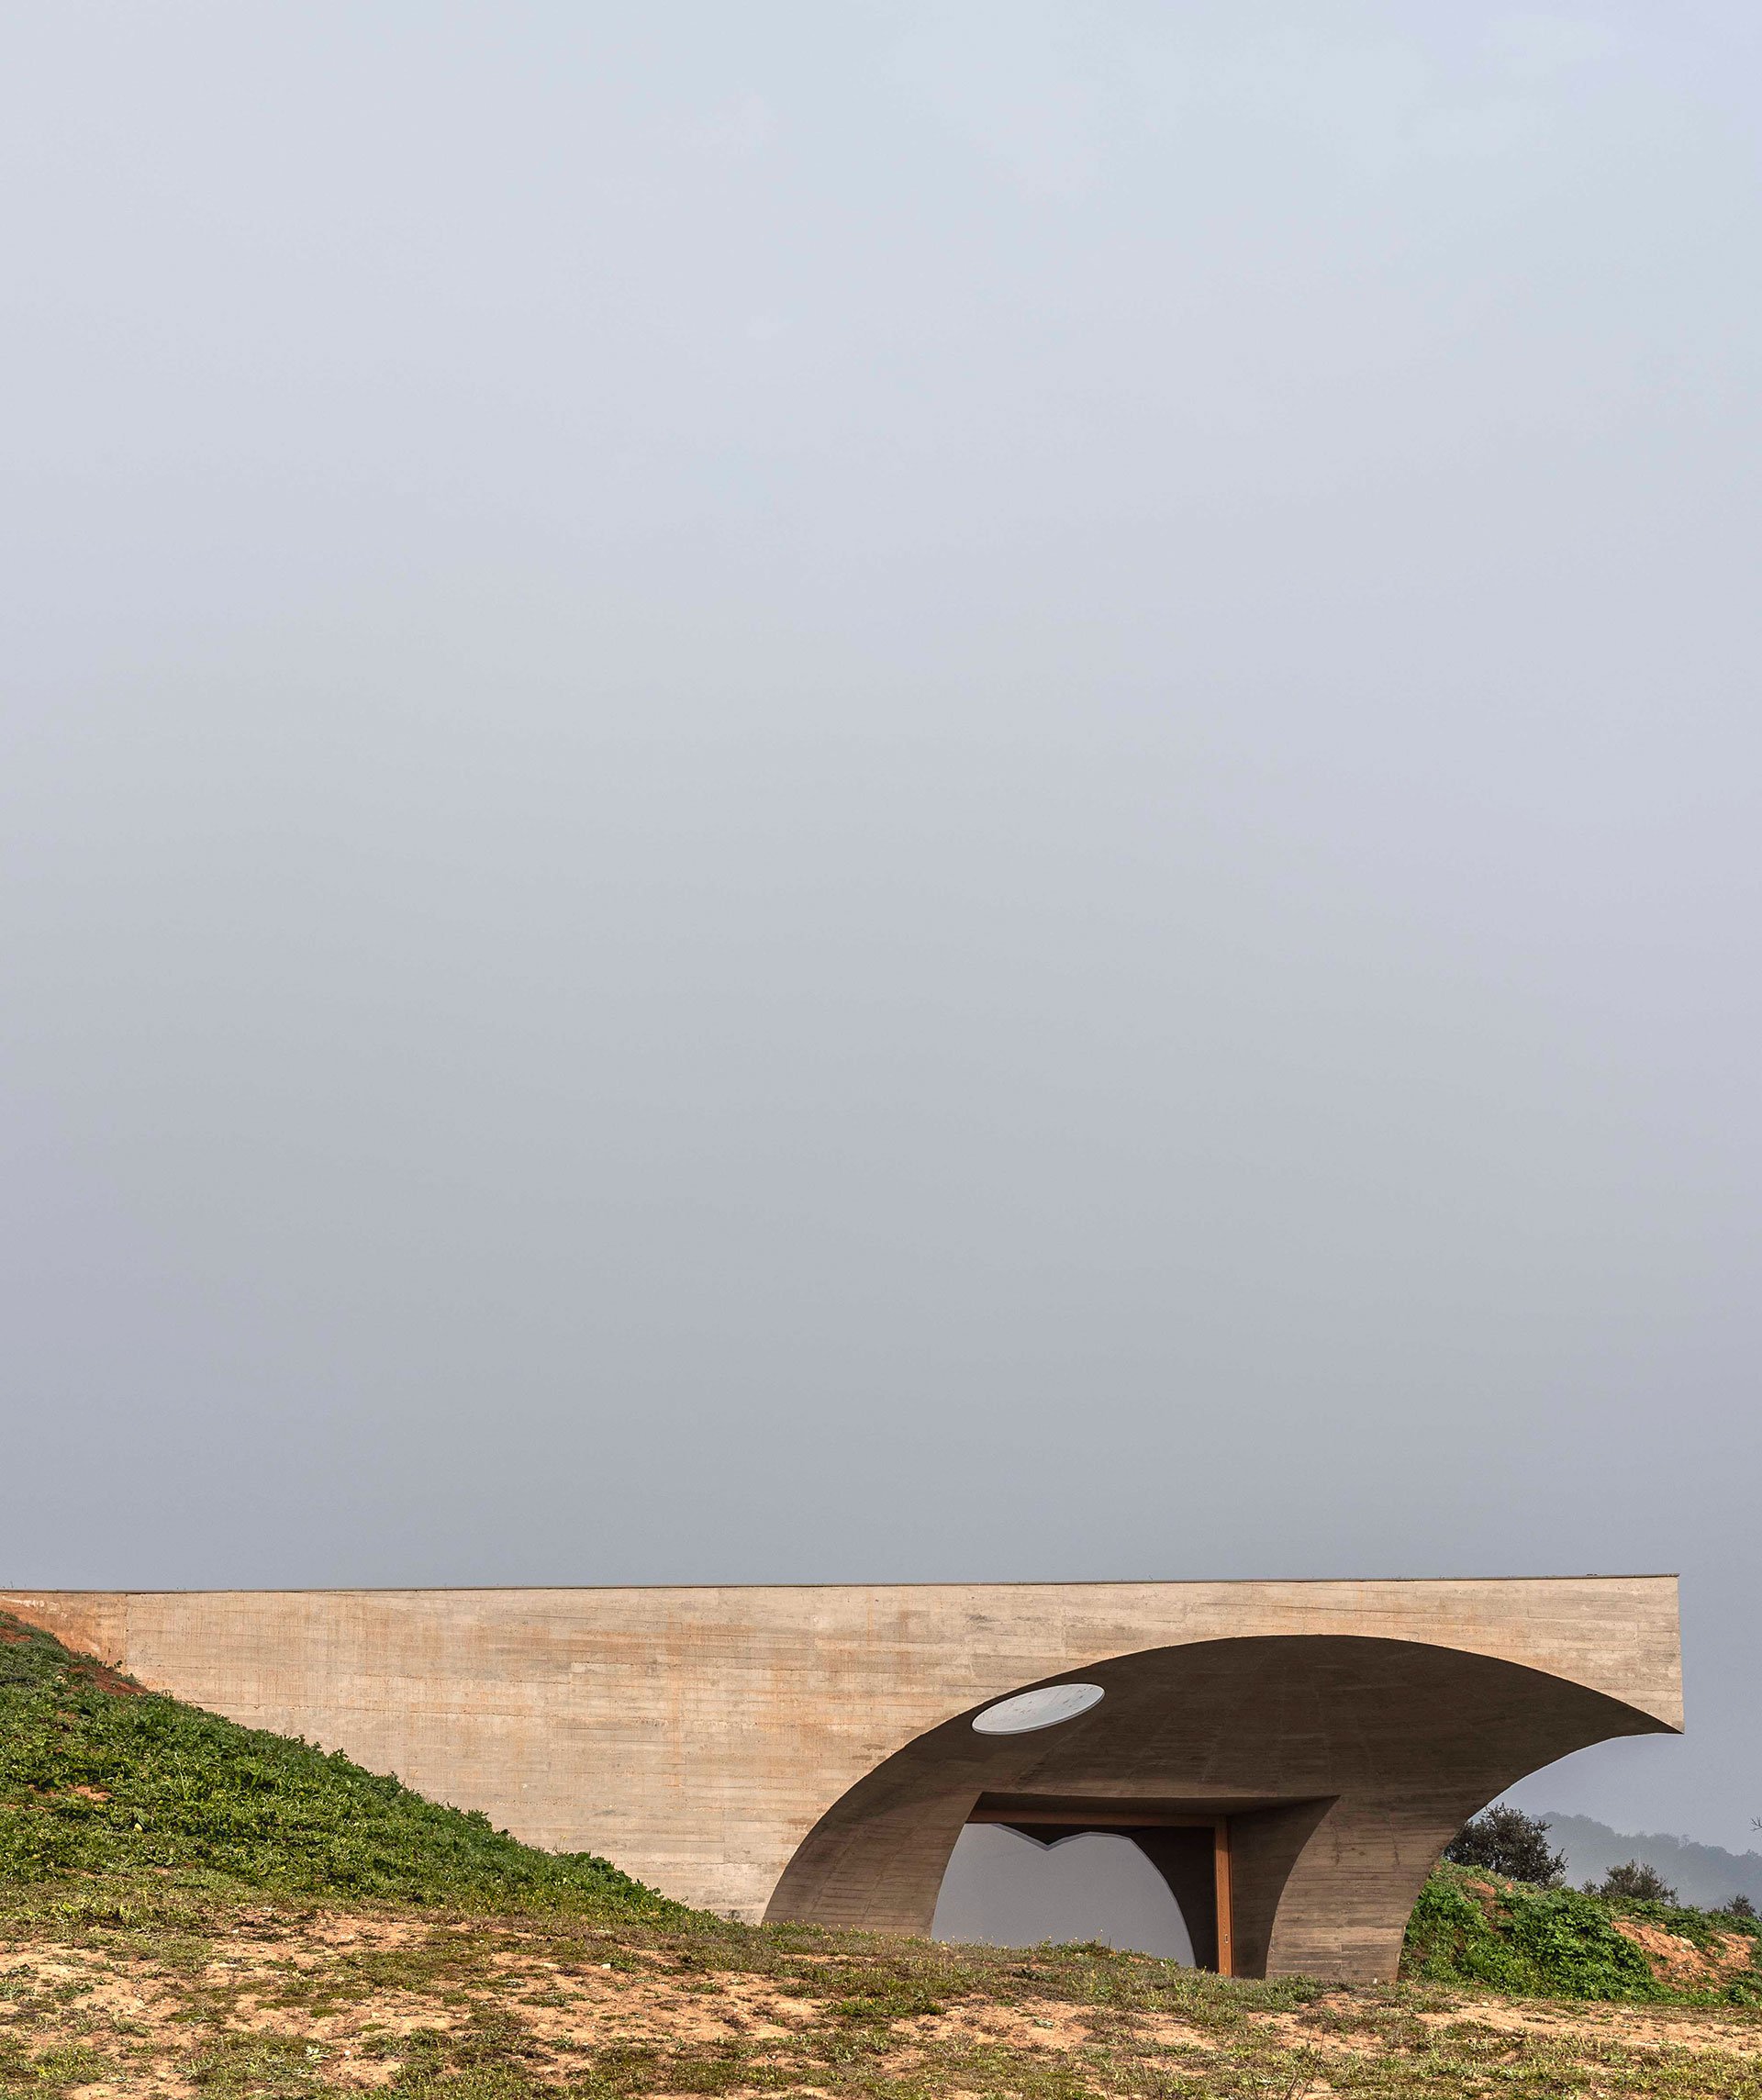 House in Monsaraz by Aires Mateus Architects.
Photo by Joao Guimaraes.